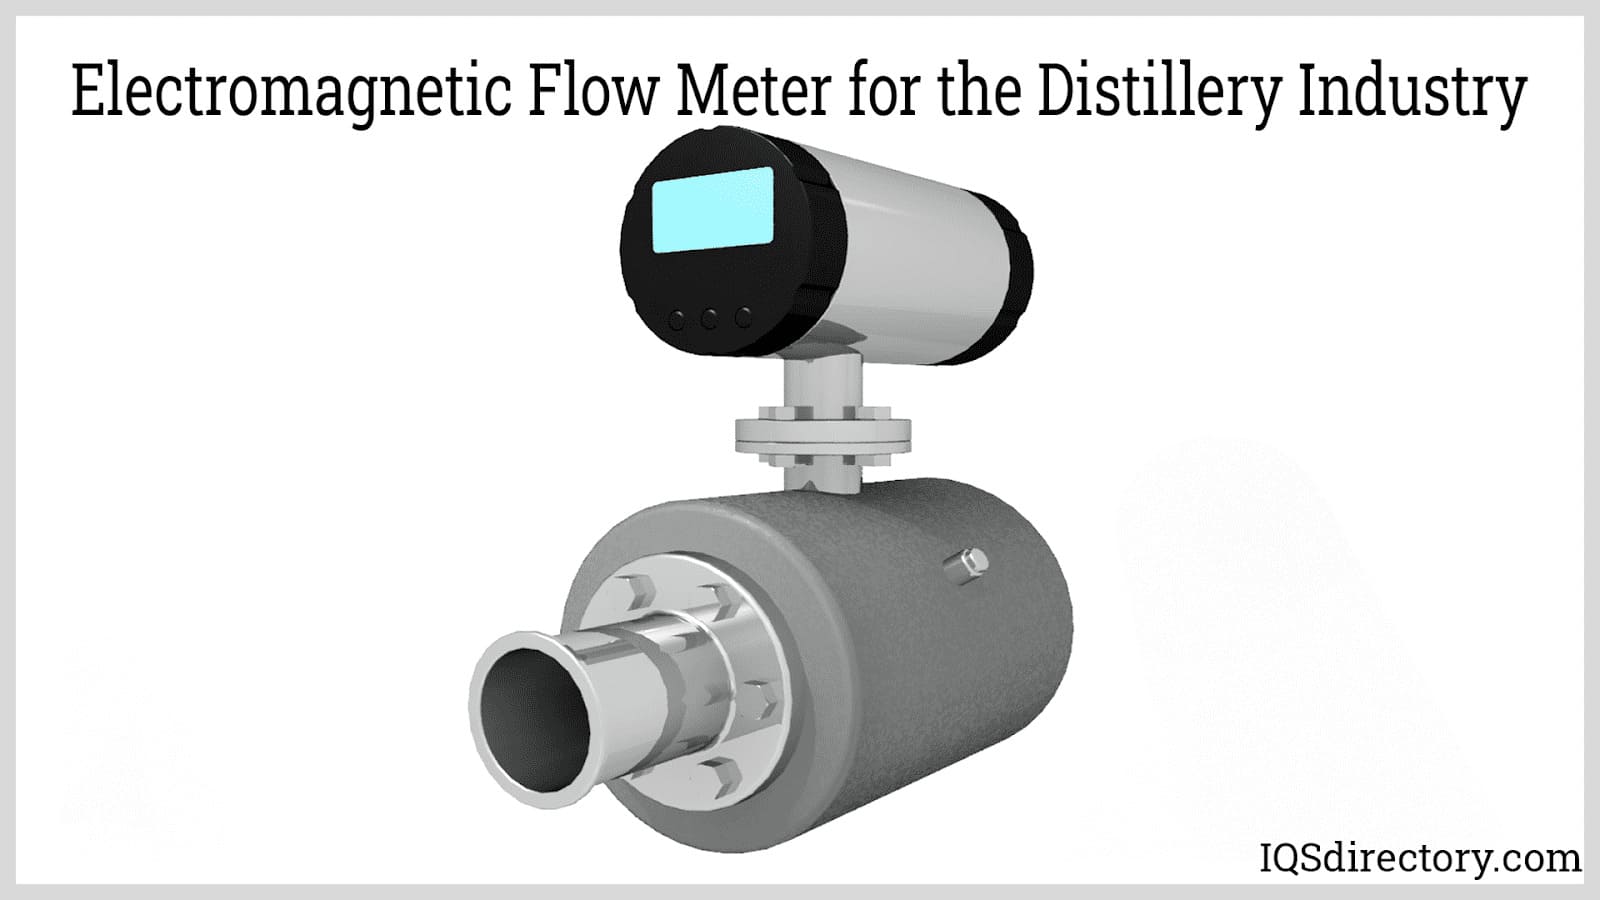 Electromagnetic Flow Meter for the Distillery Industry